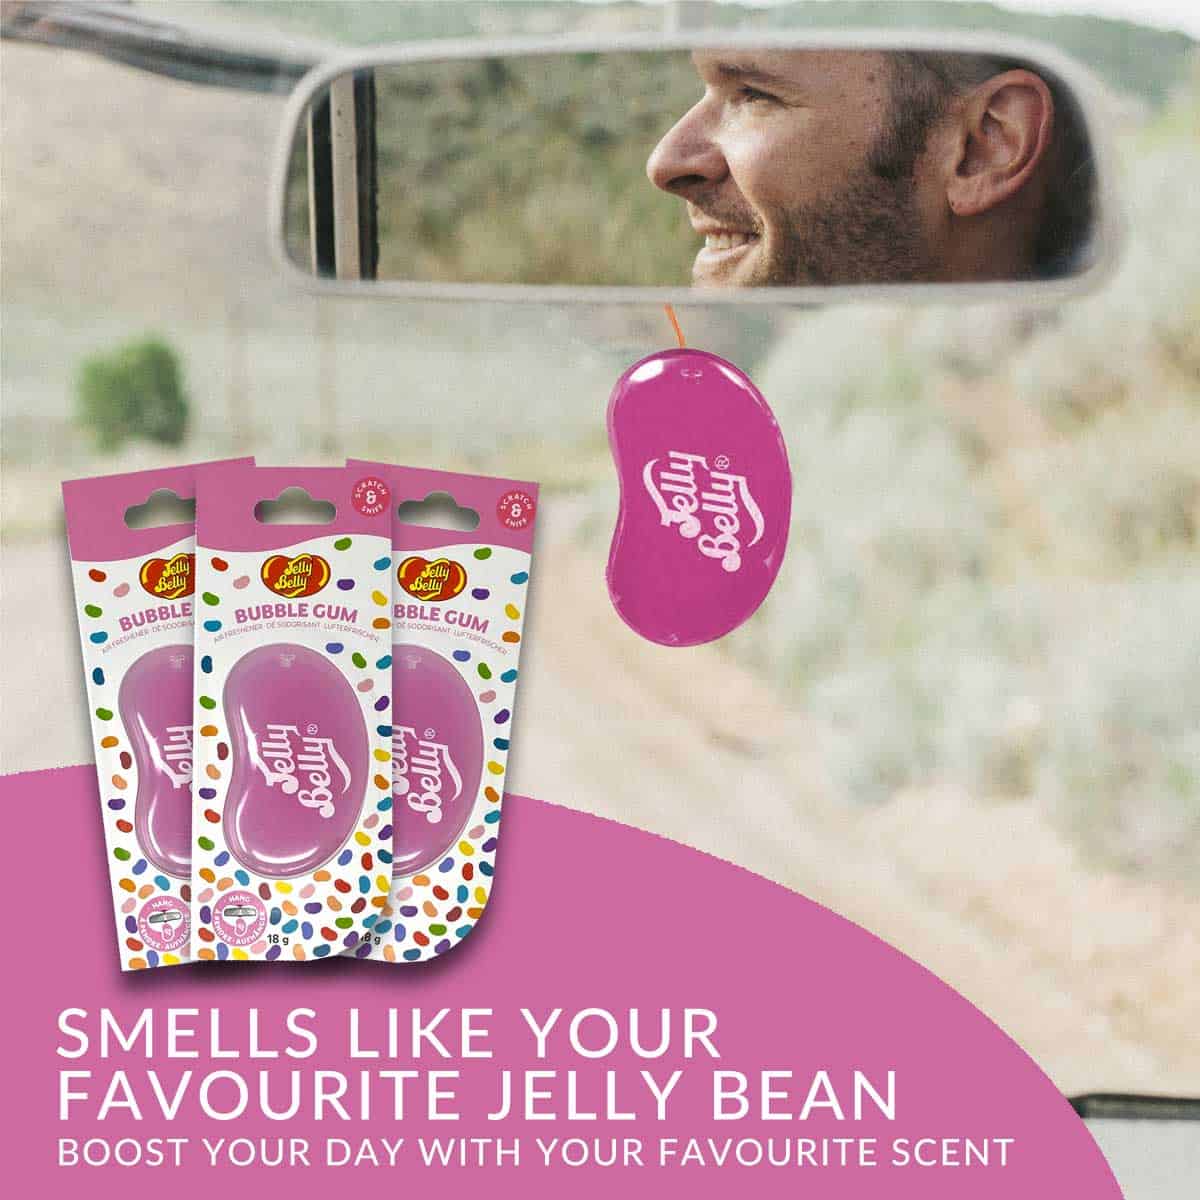 Introducing the Jelly Belly 3D Bubble Gum Air Freshener Gel Hanging 3x-Pack! This powerful air freshener is designed to transform your car or home environment with its invigorating fragrance. Whether you're a meticulous car enthusiast or simply someone who appreciates a fresh-smelling space, this air freshener is perfect for you.